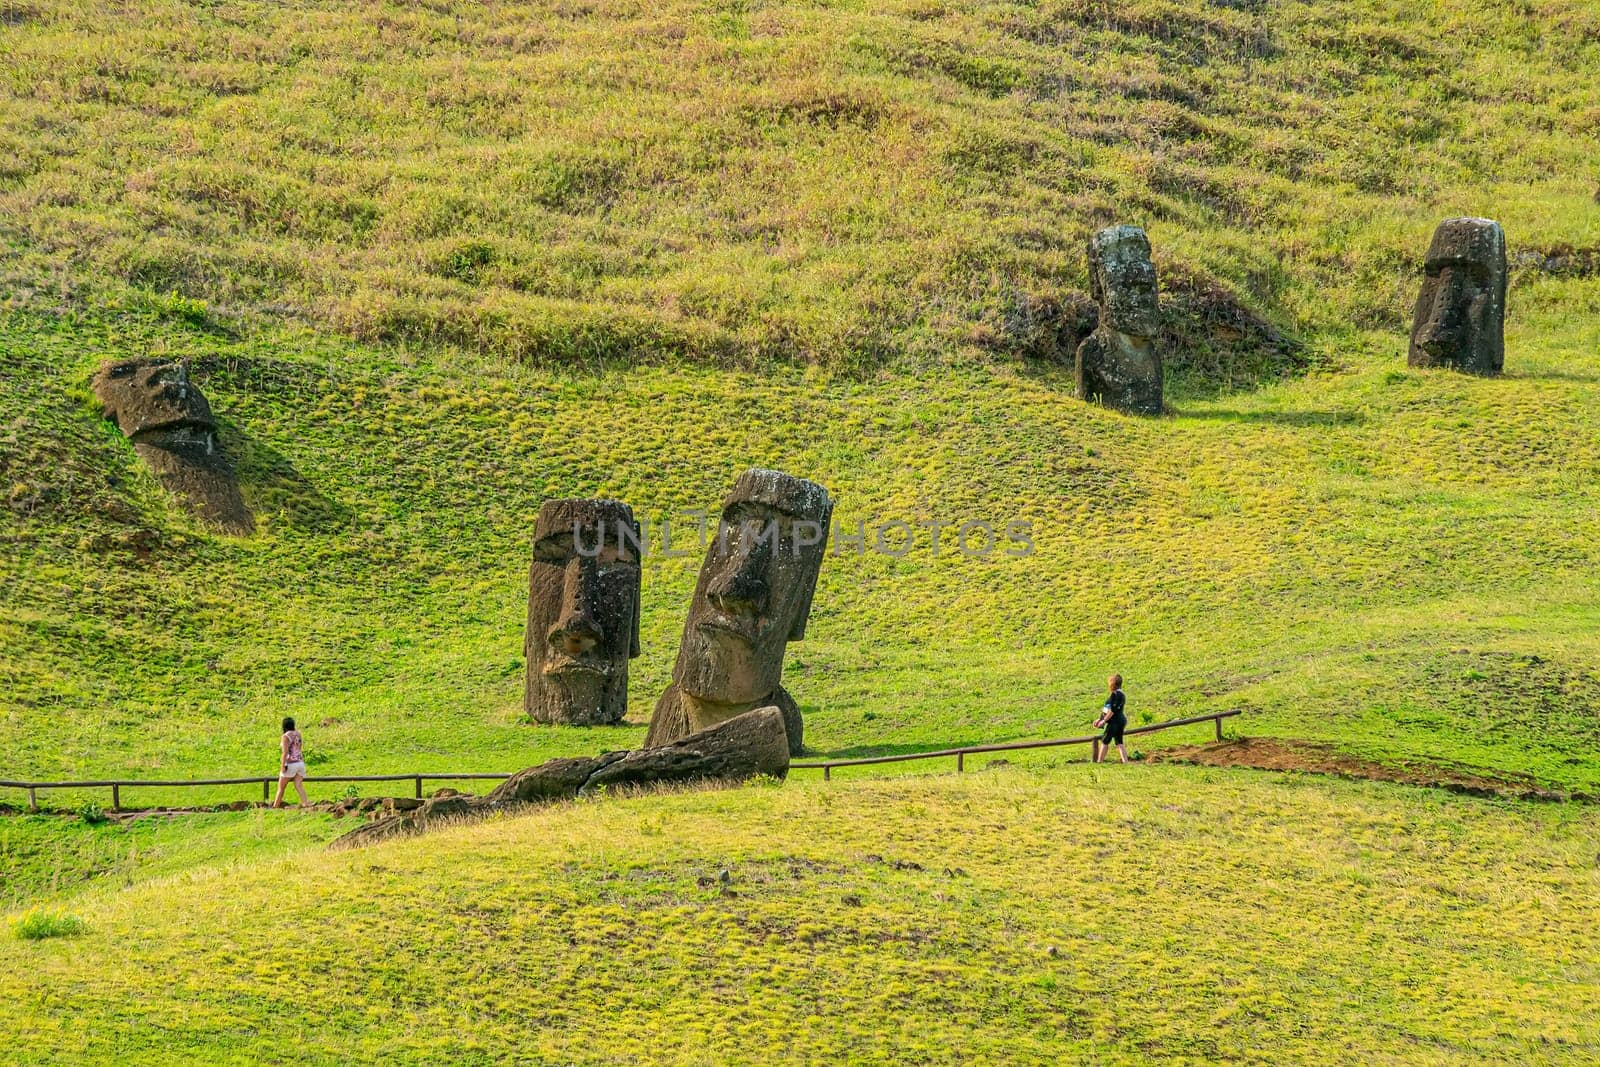 The ancient moai on Easter Island in Chile